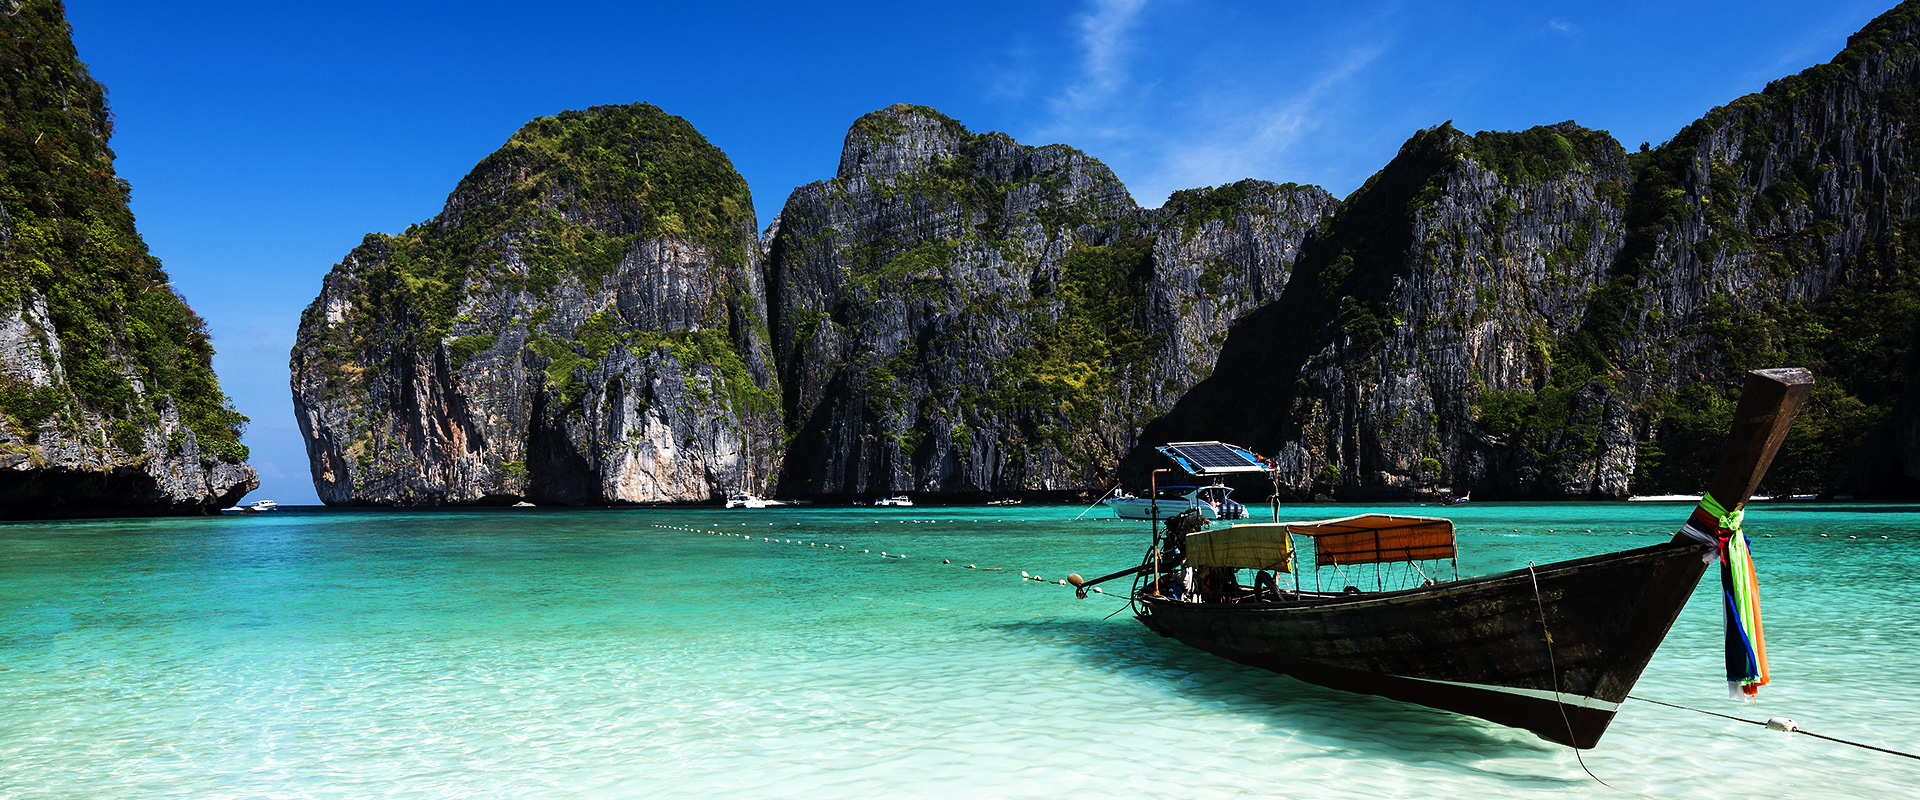 Category: Krabi Must-See Attractions and Places